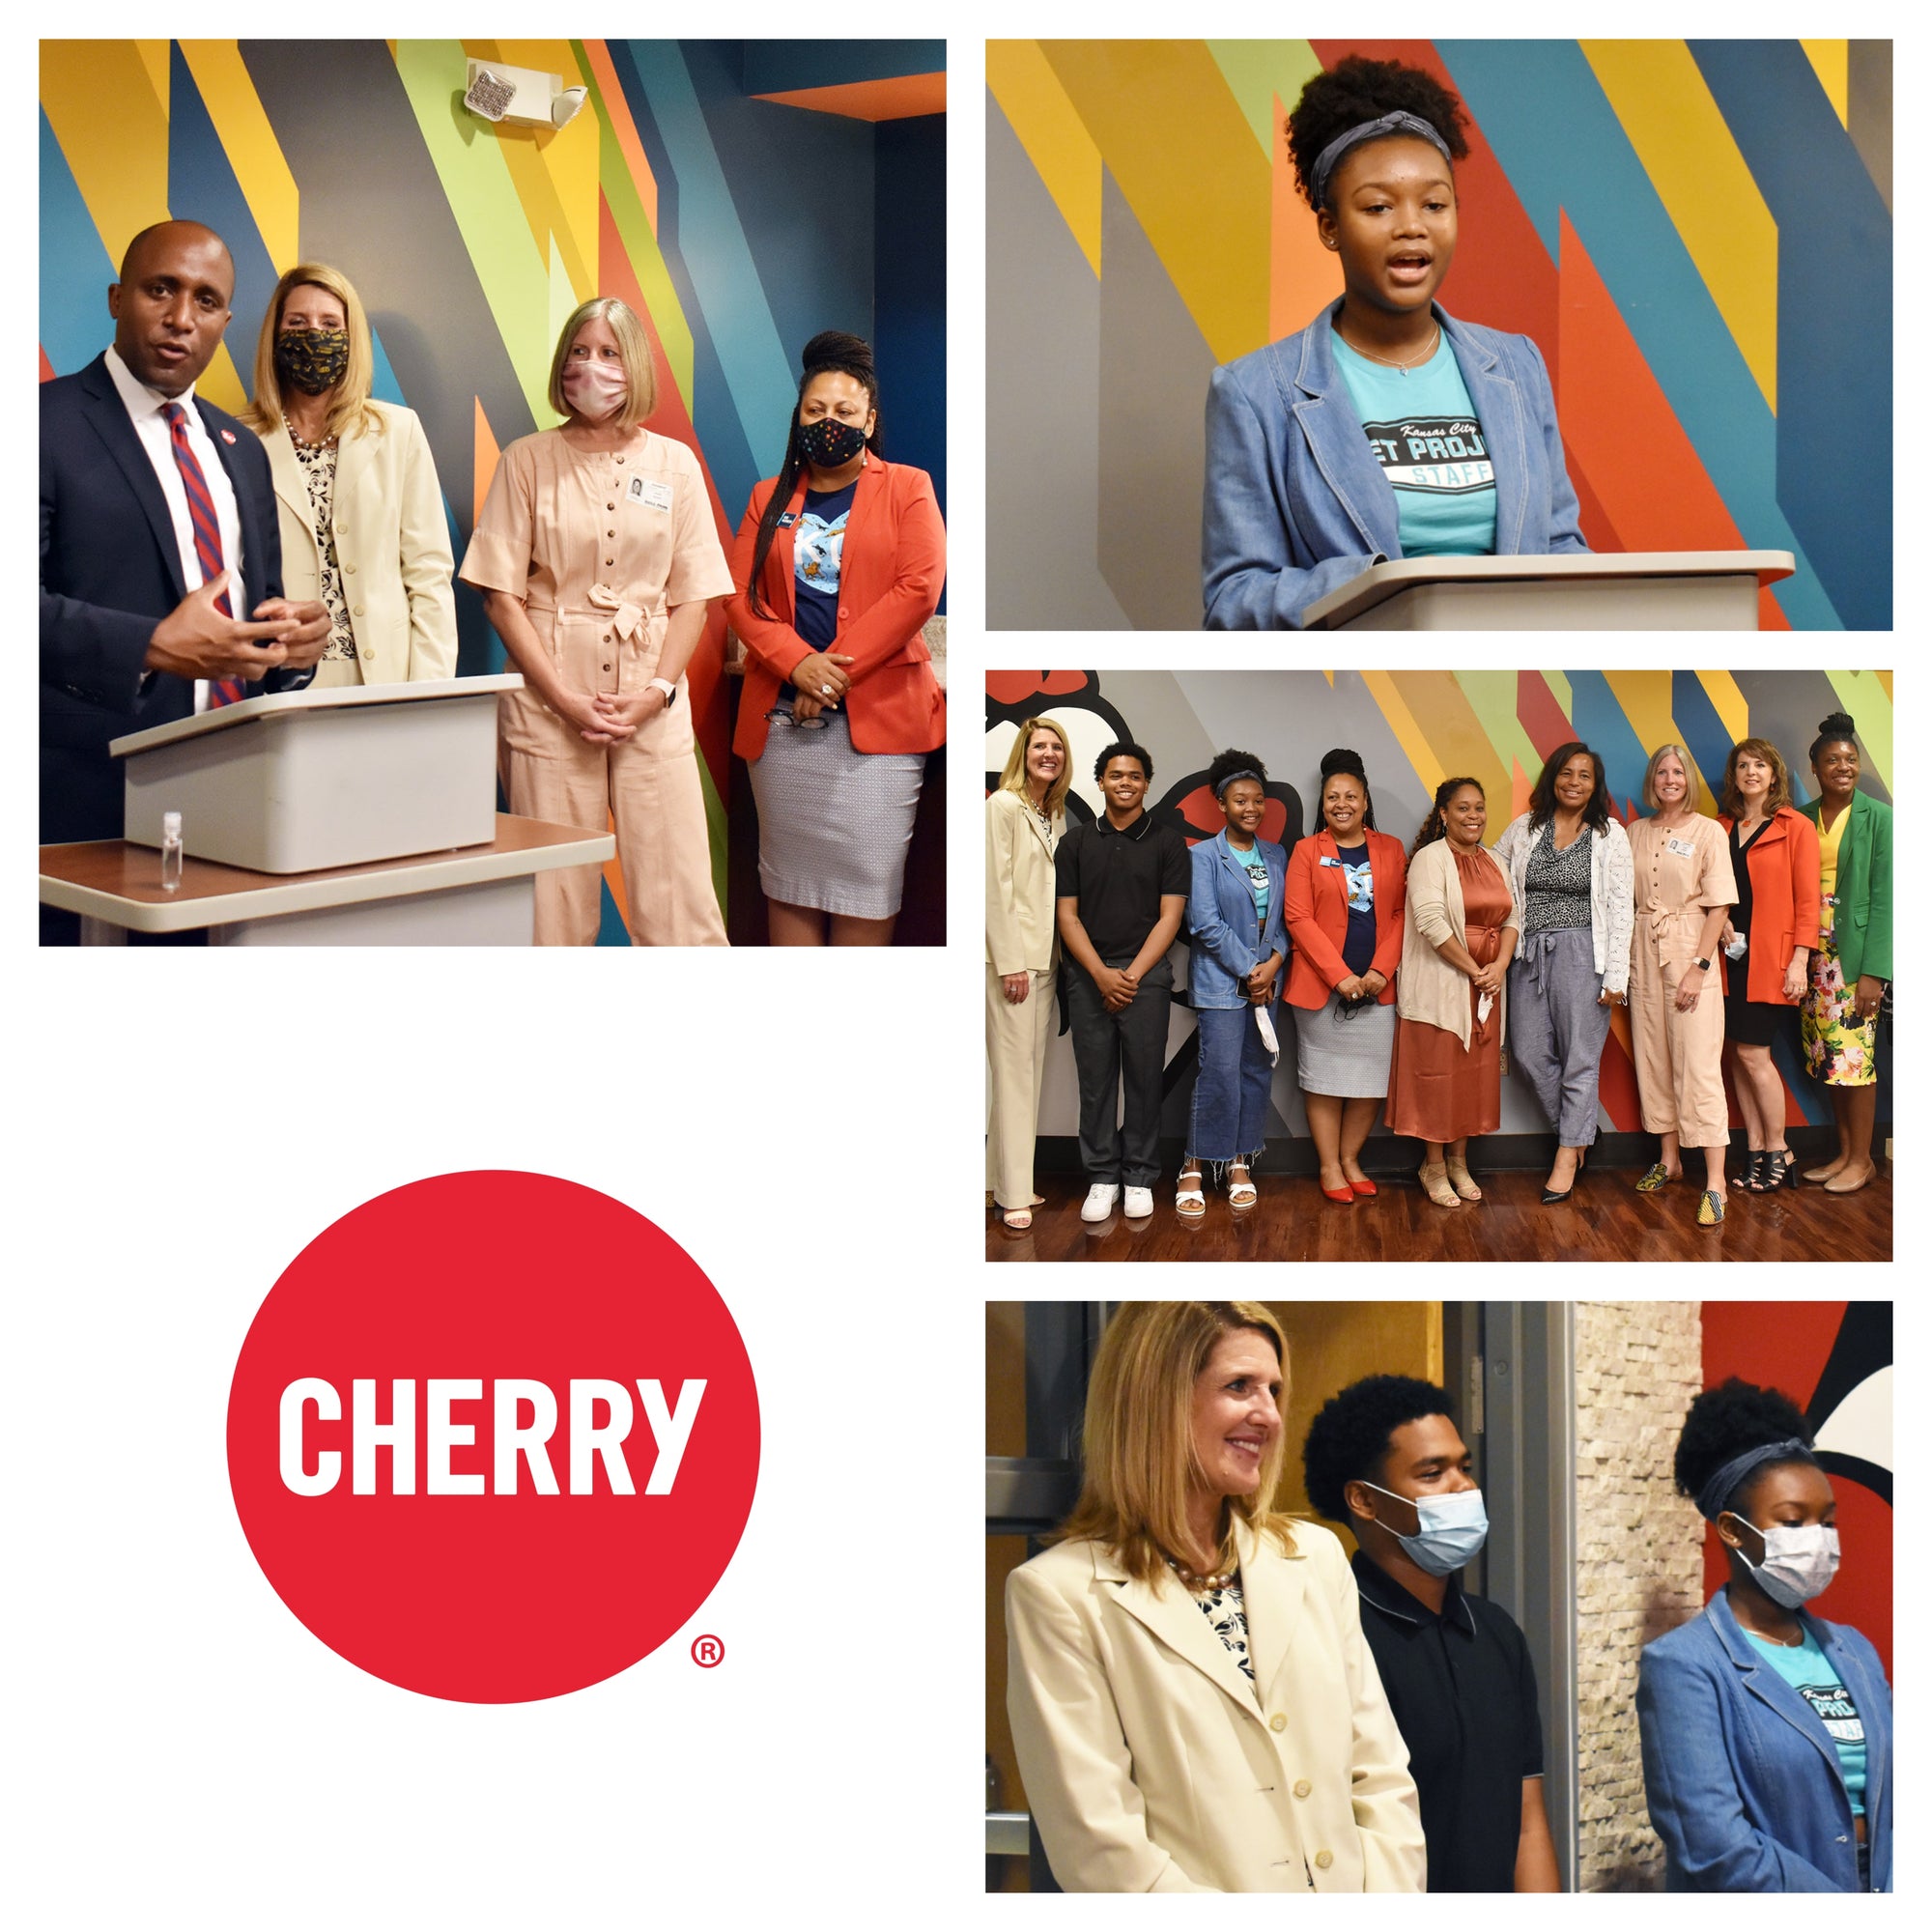 Cherry Foundation provides KC youth jobs for 427 teens & raises $600K for stipend fund